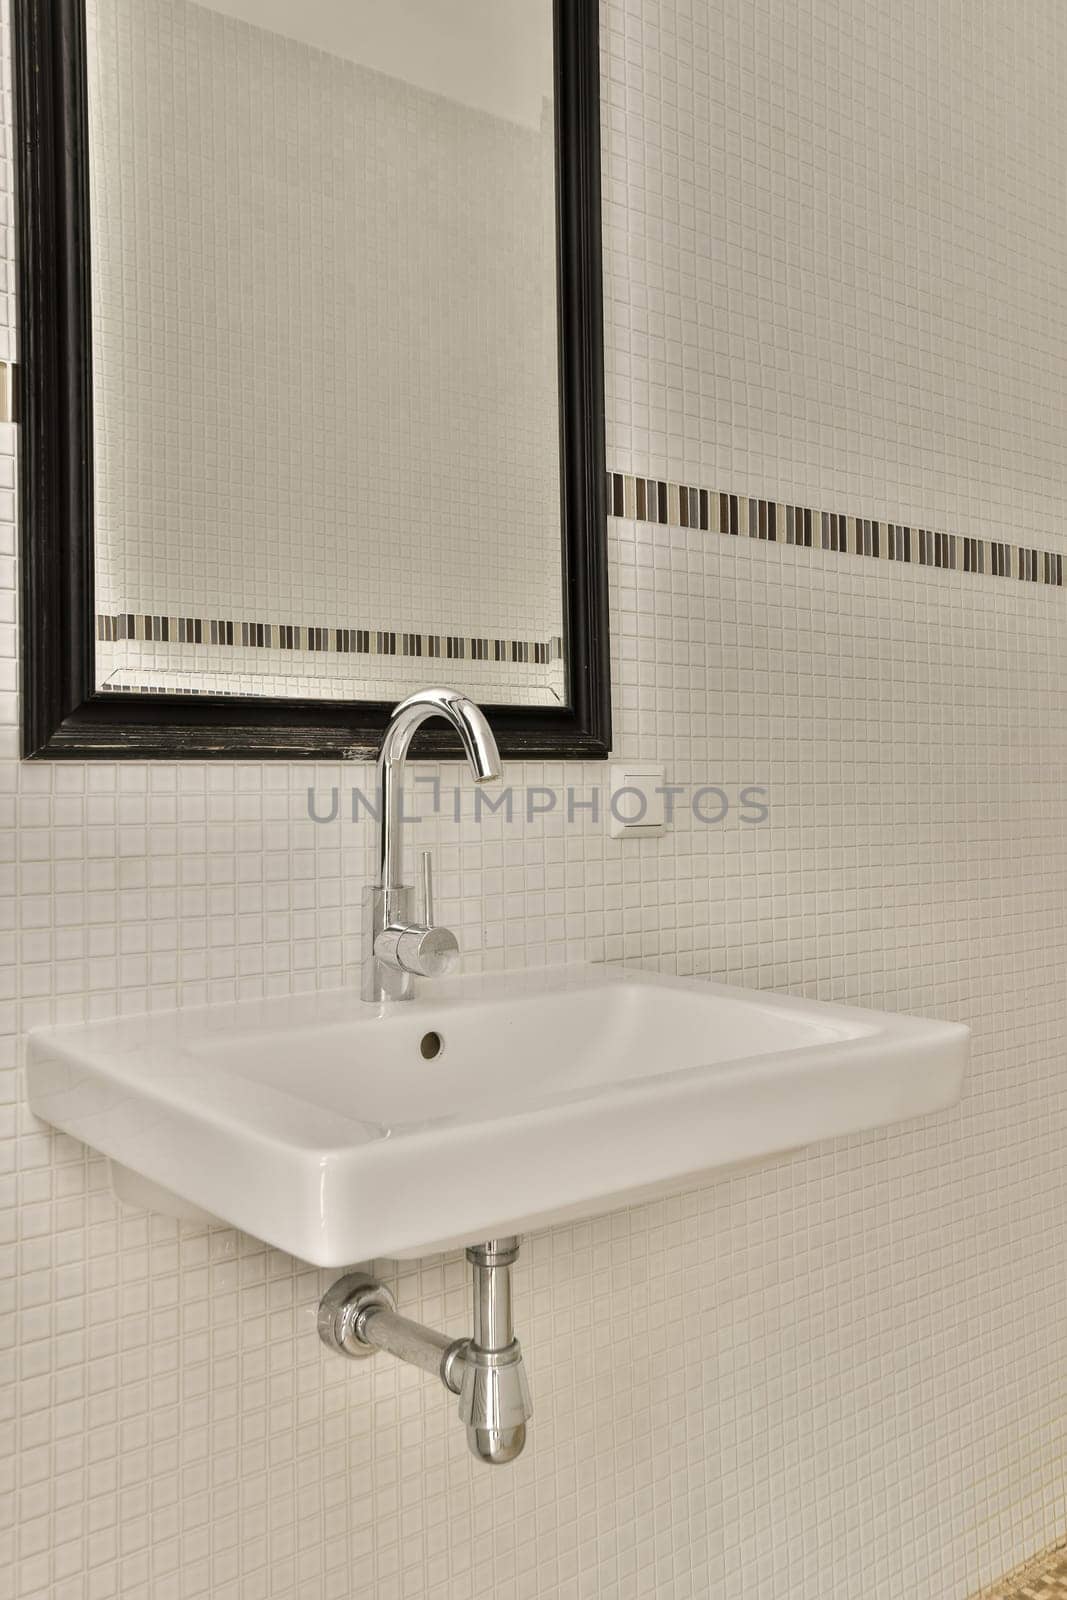 a bathroom with white tiles and black trim on the wall above the sink is a mirror that hangs over it